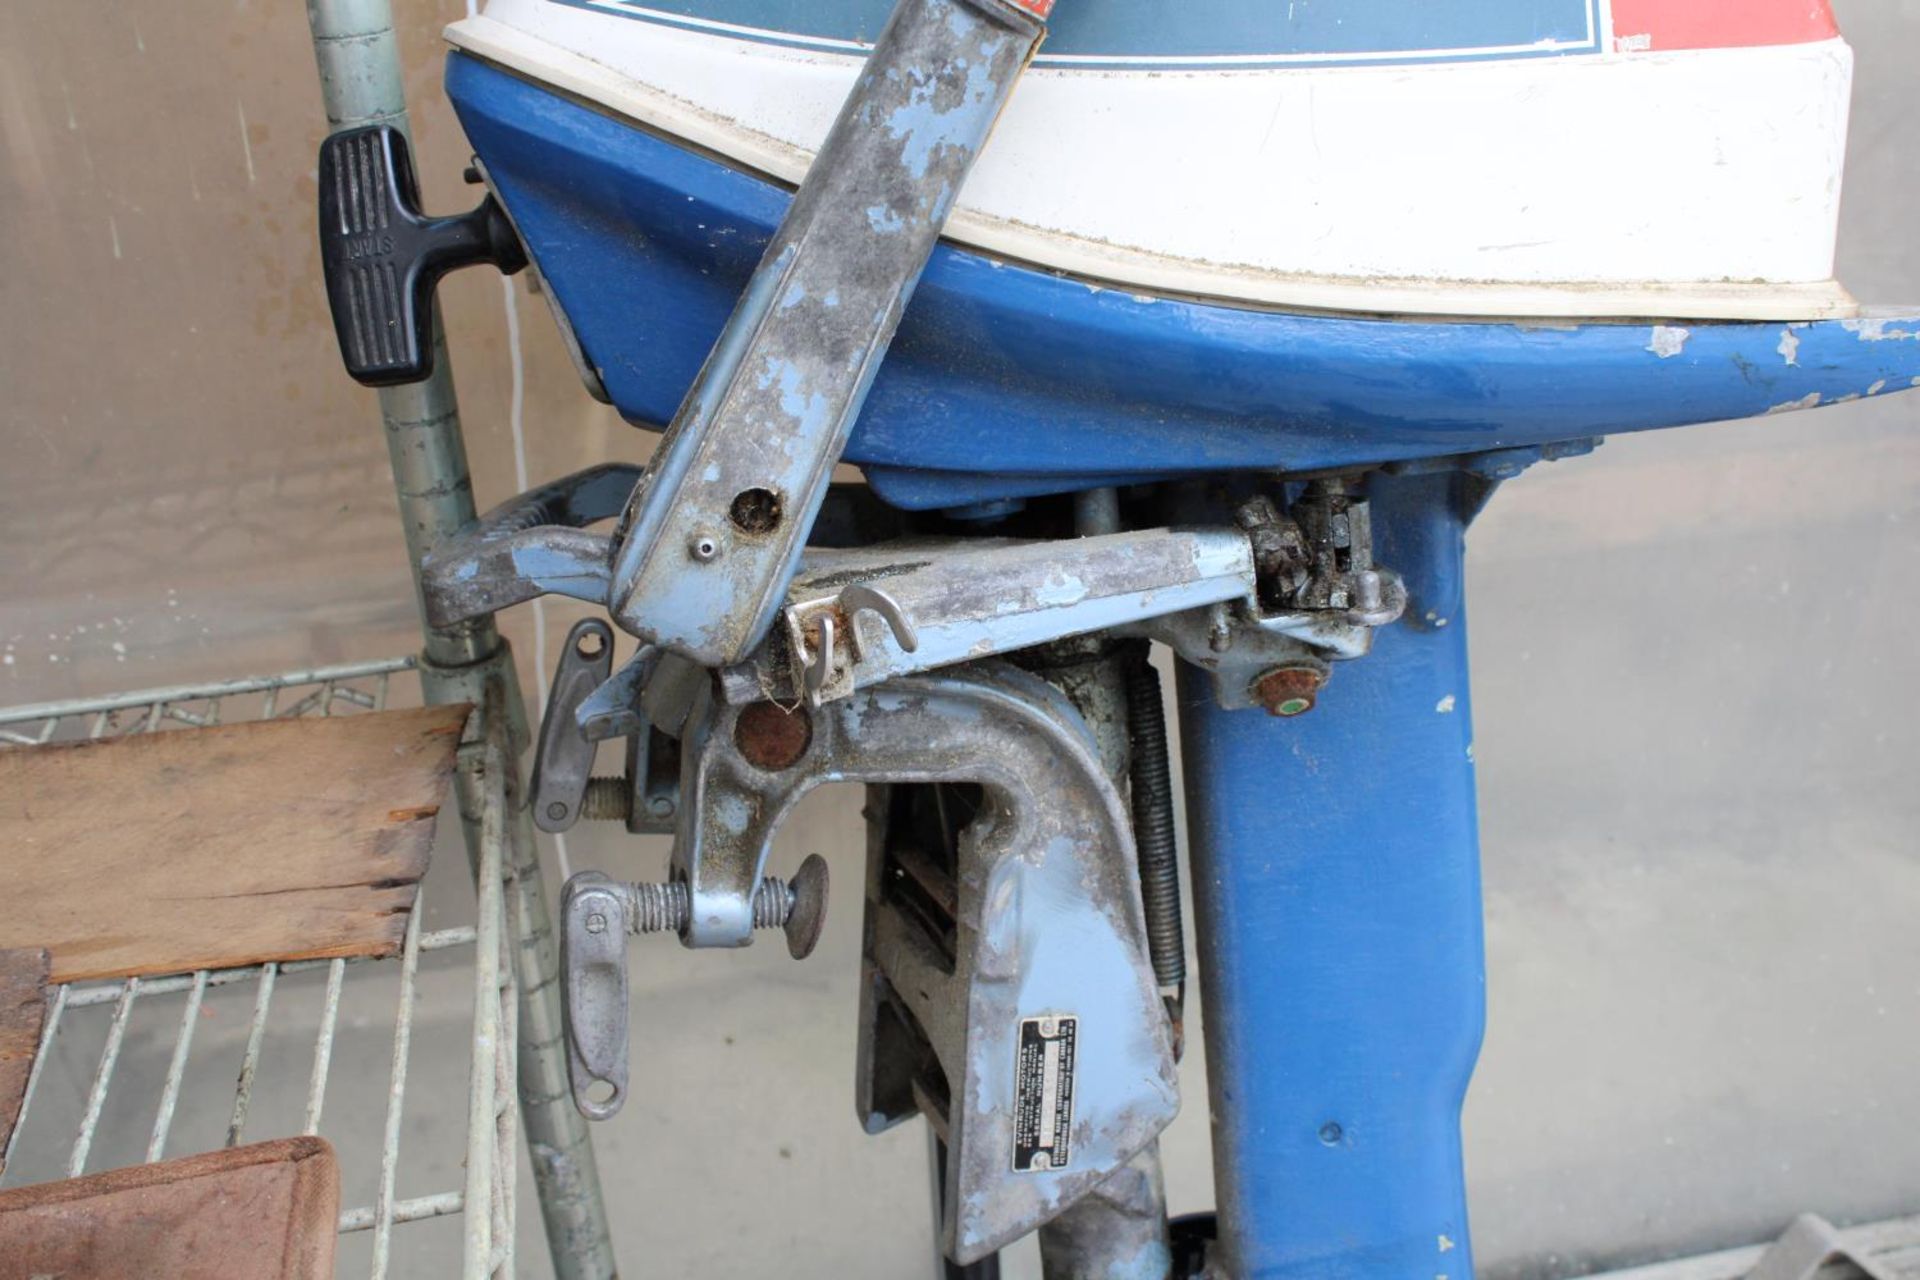 A FISHERMAN EVINRUDE OUTBOARD MOTOR - Image 3 of 4